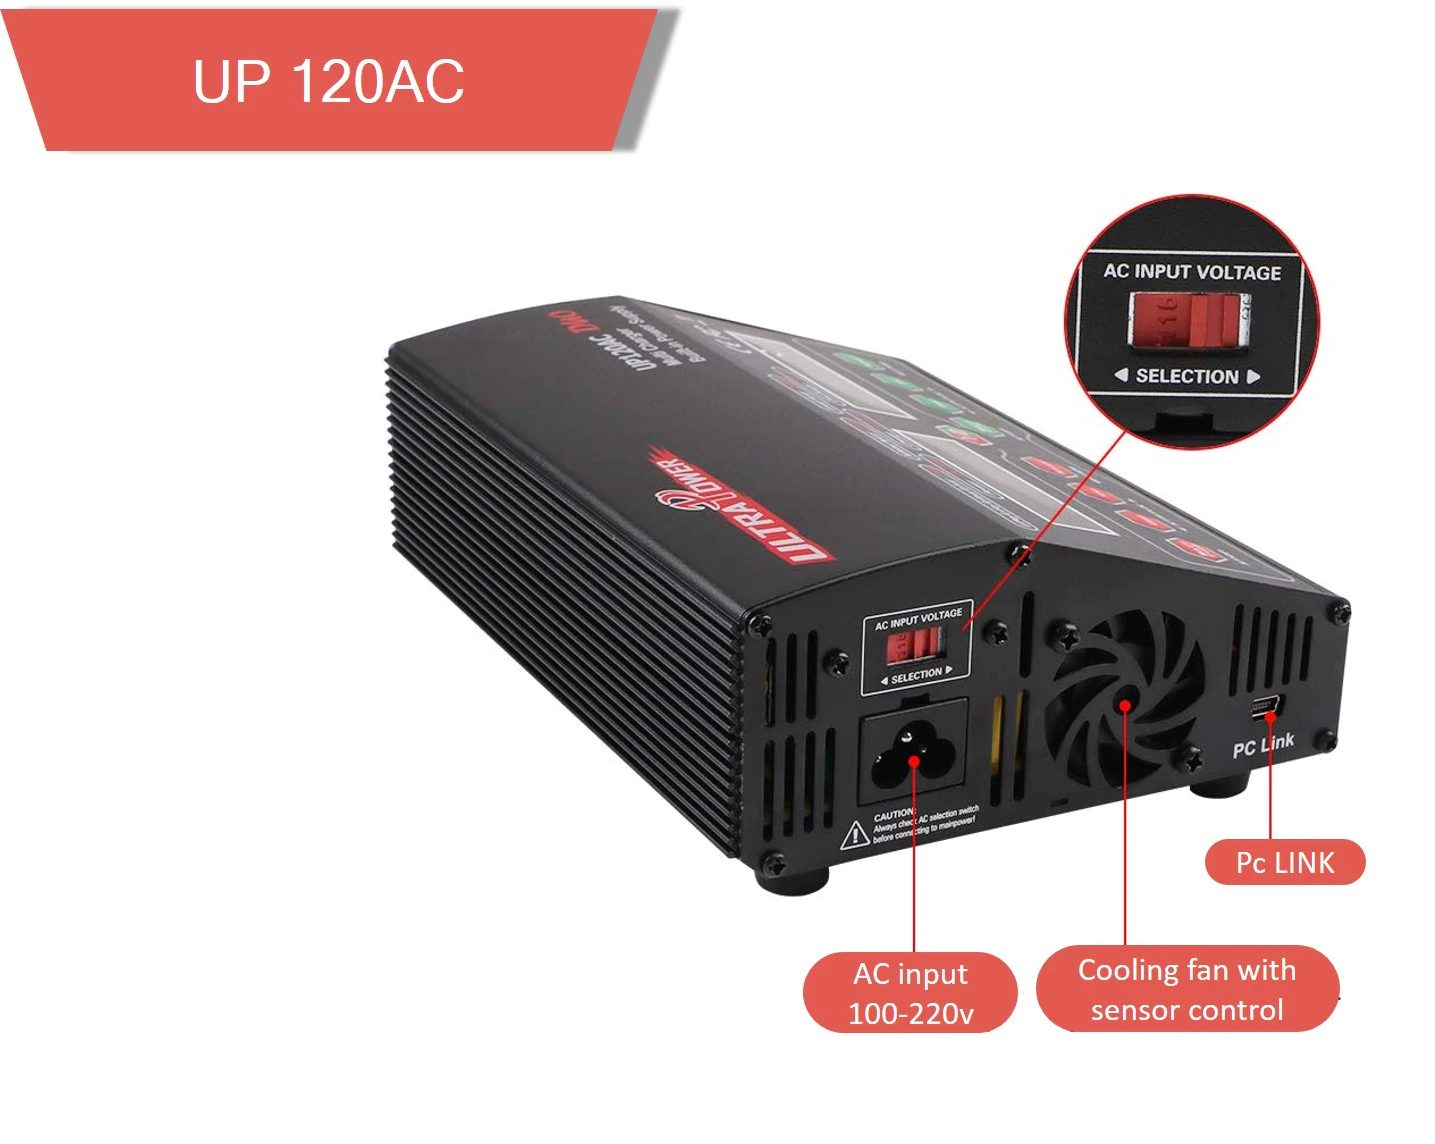 Up120 4 - up120 duo,ultra power charger,balance charger,lipo charger,power supply - motionew - 5